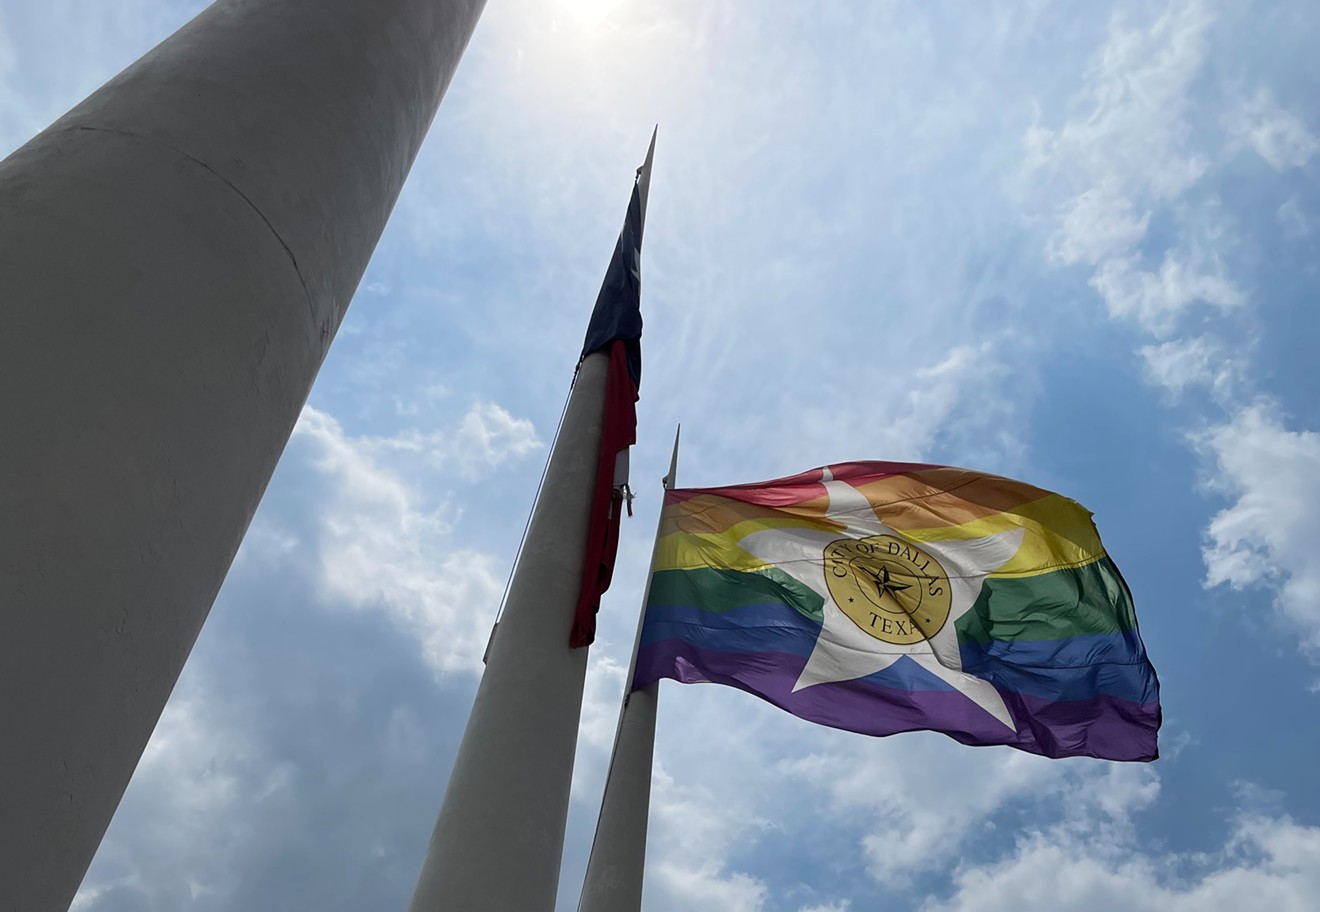 Local officials raised Dallas' Pride flag on Thursday at City Hall.